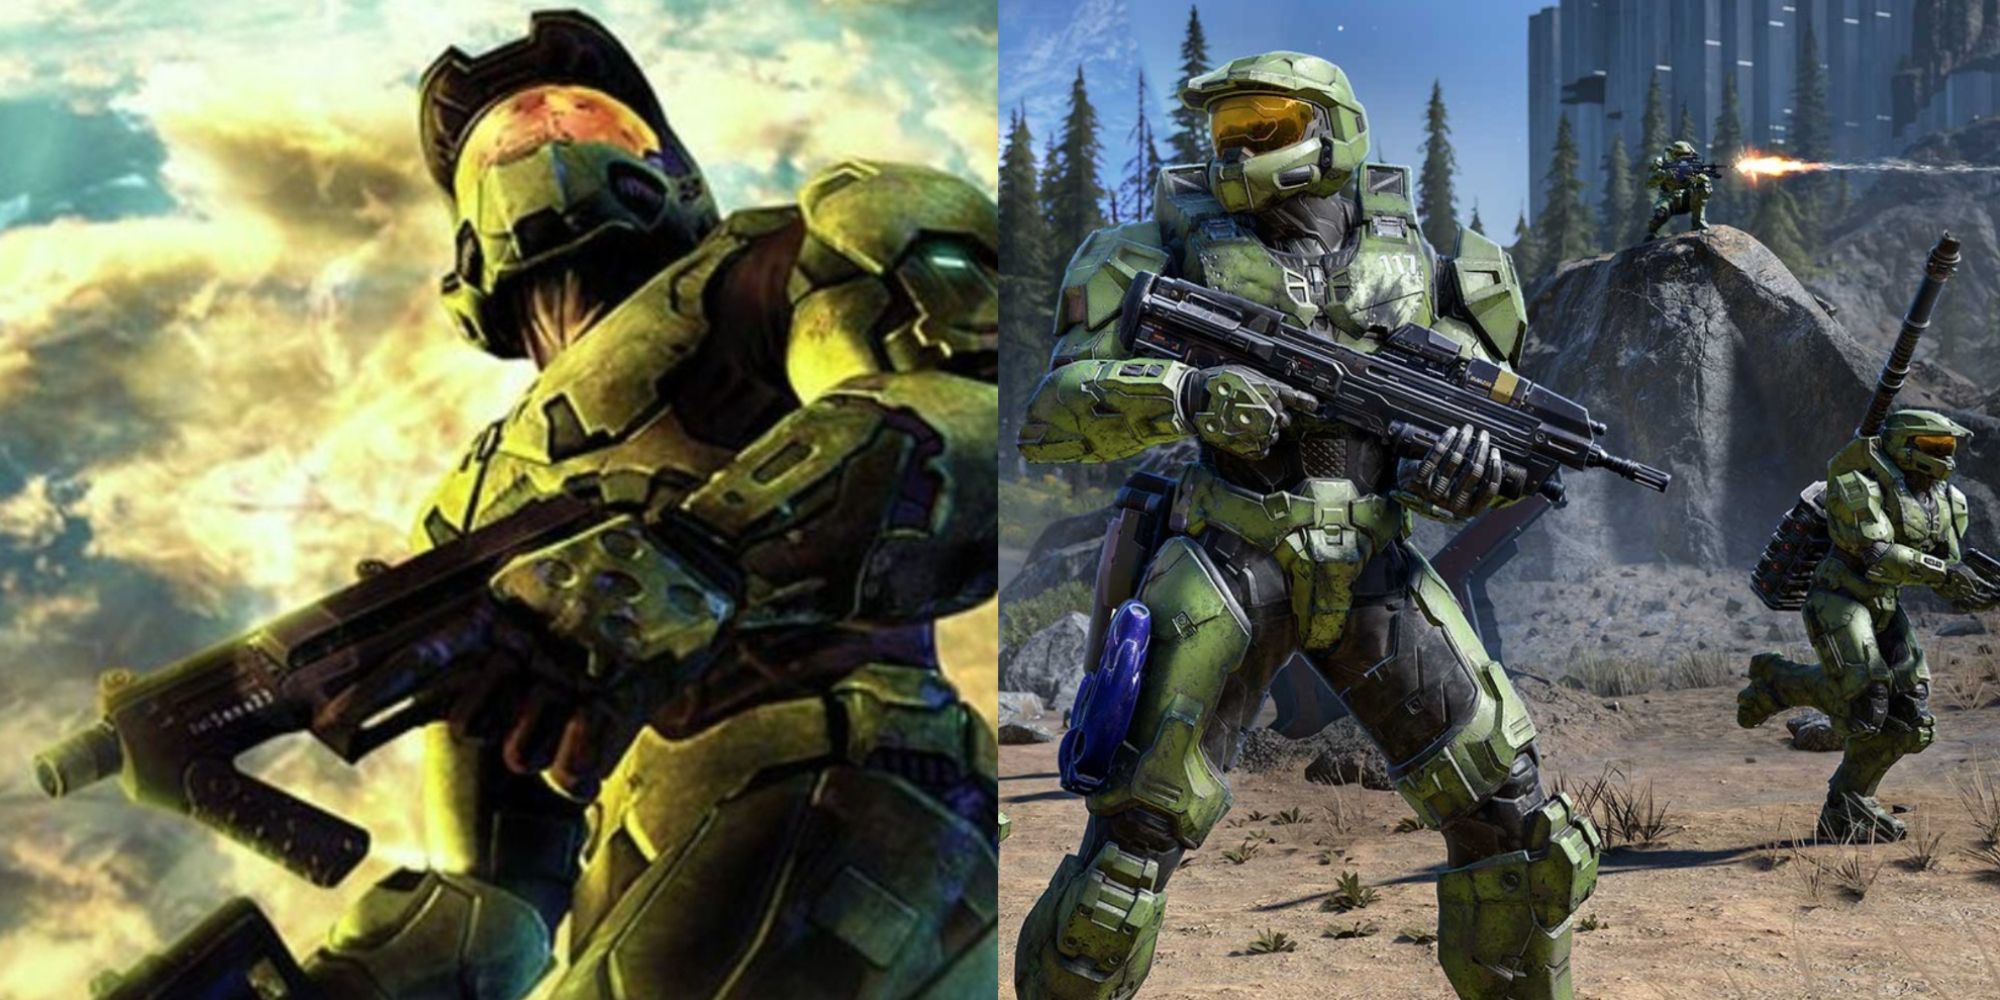 How Many Weapons Are In Halo Featured Split Image Master Chief SMG and Multiple Master Chiefs with weapons